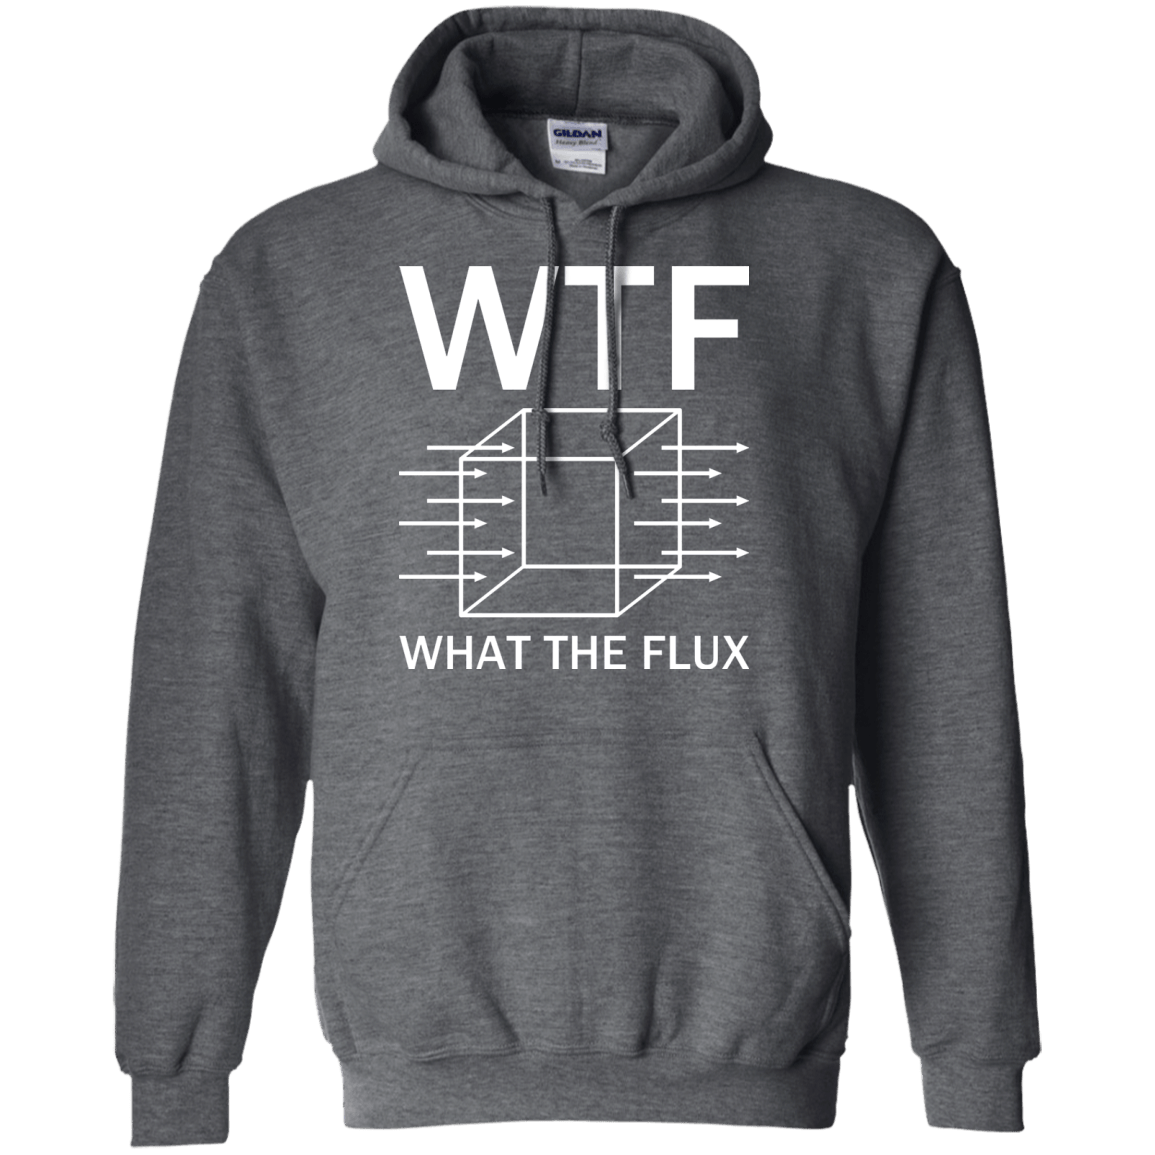 WTF - What The Flux